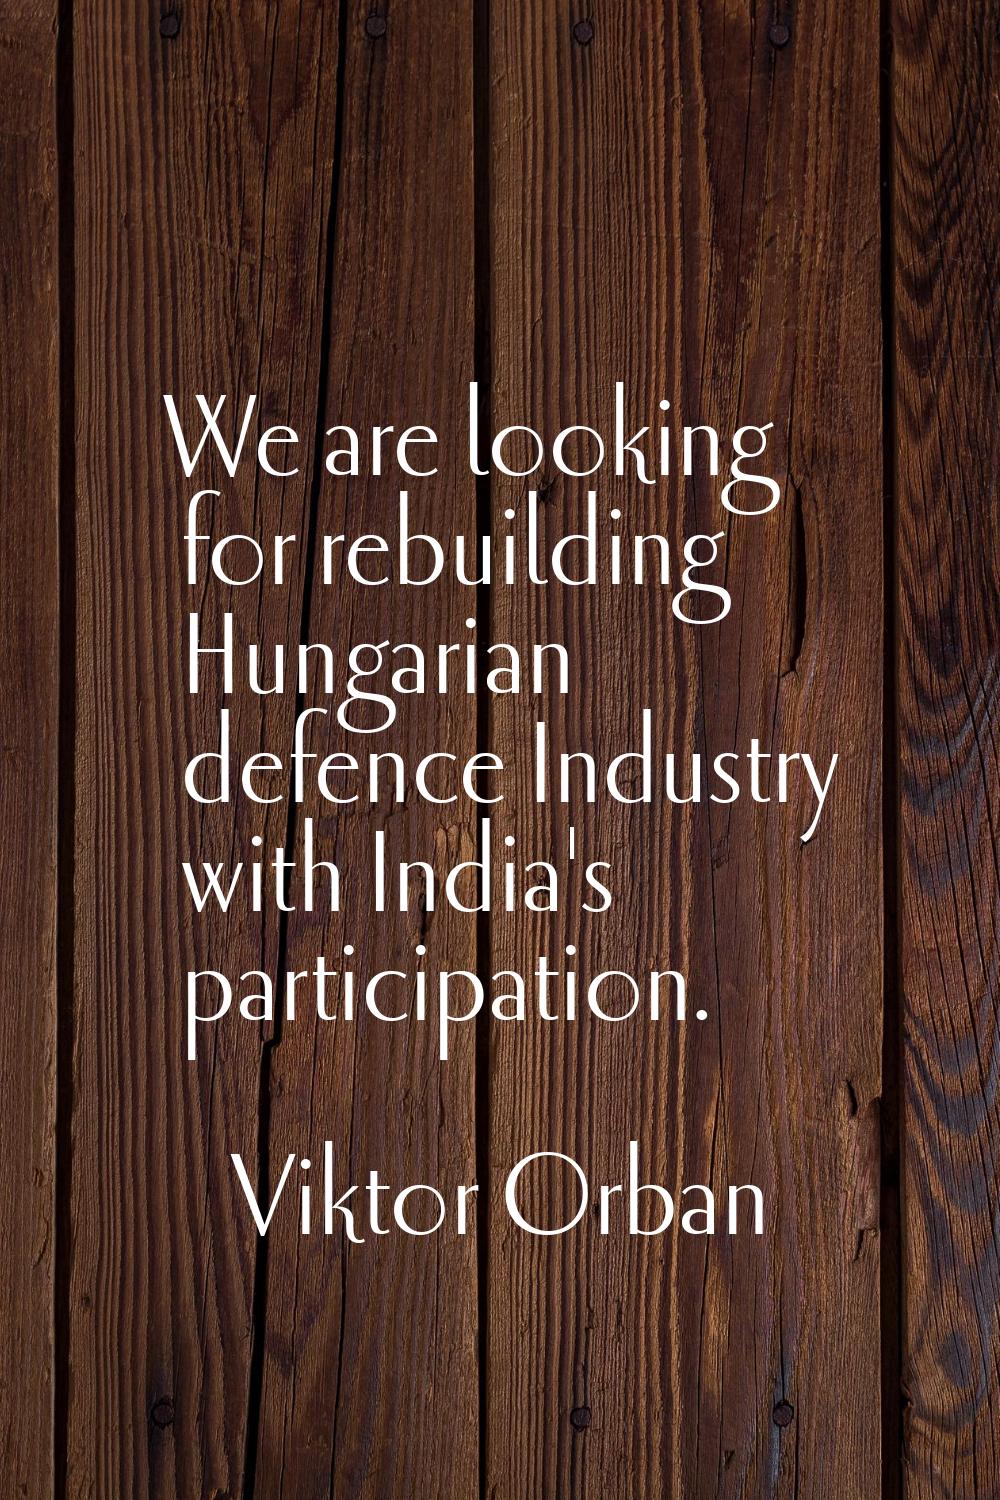 We are looking for rebuilding Hungarian defence Industry with India's participation.